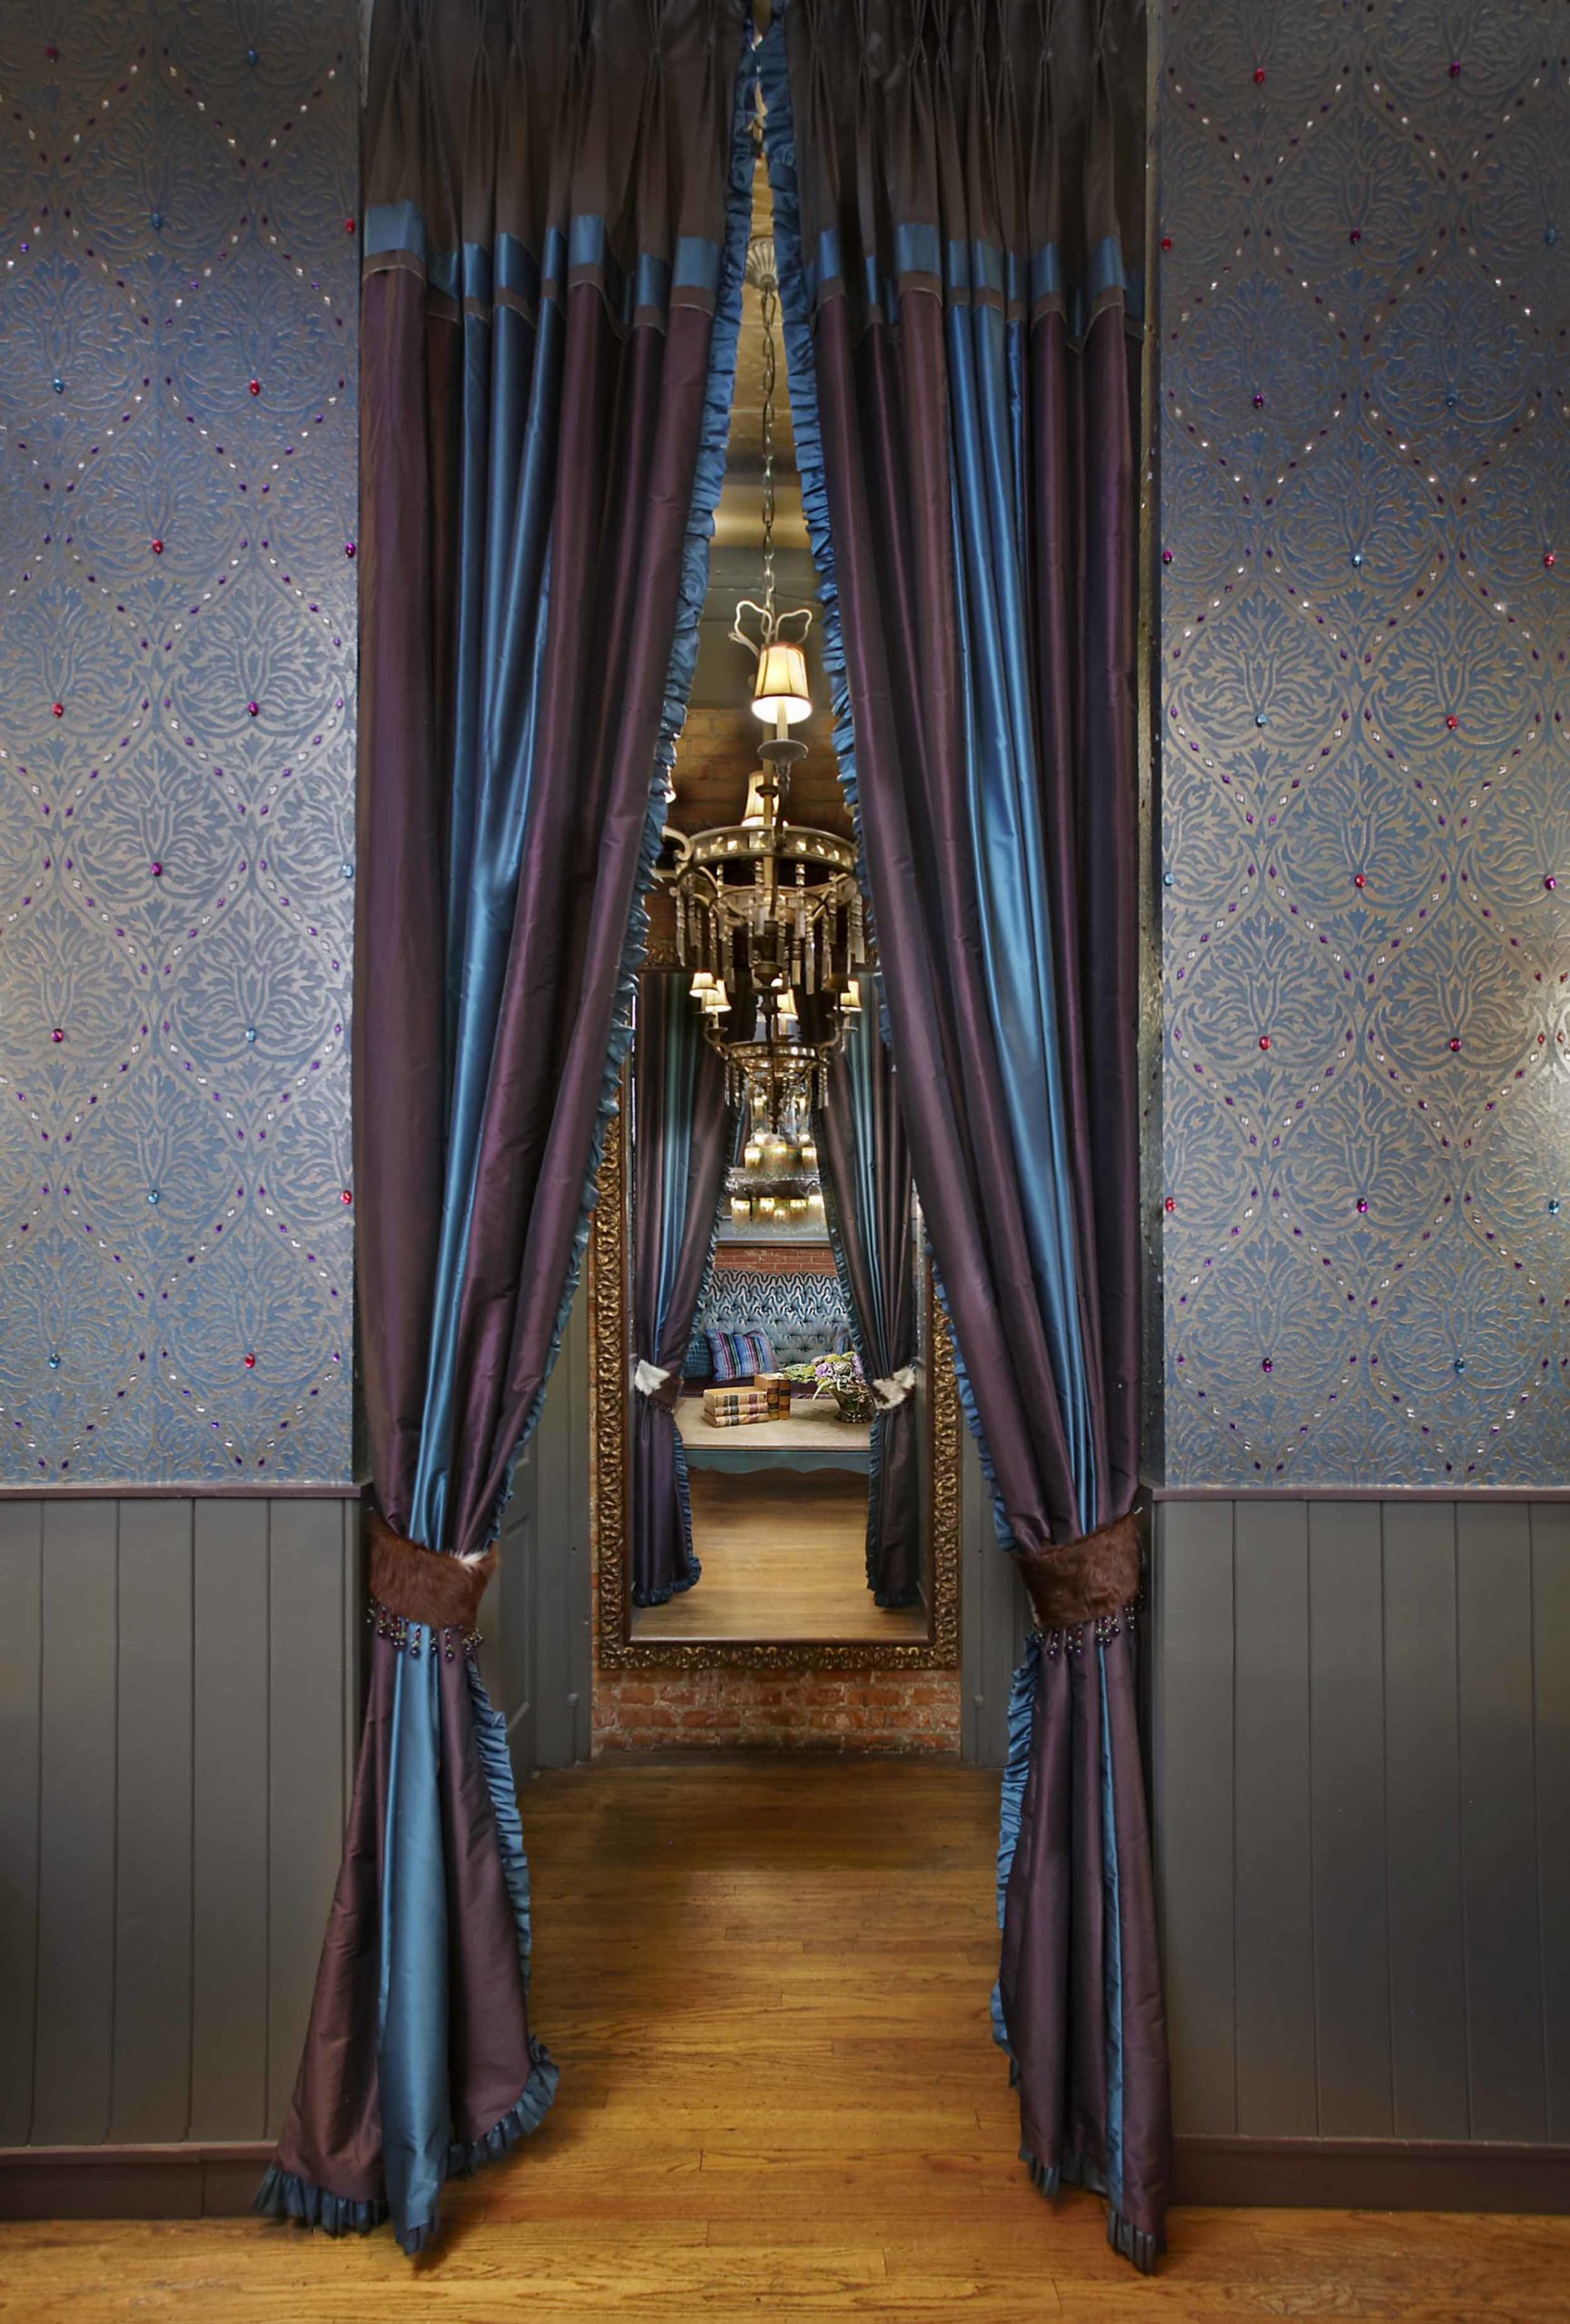 Hallway with a chandelier, mirror, purple drapes and beautiful jeweled wallpaper